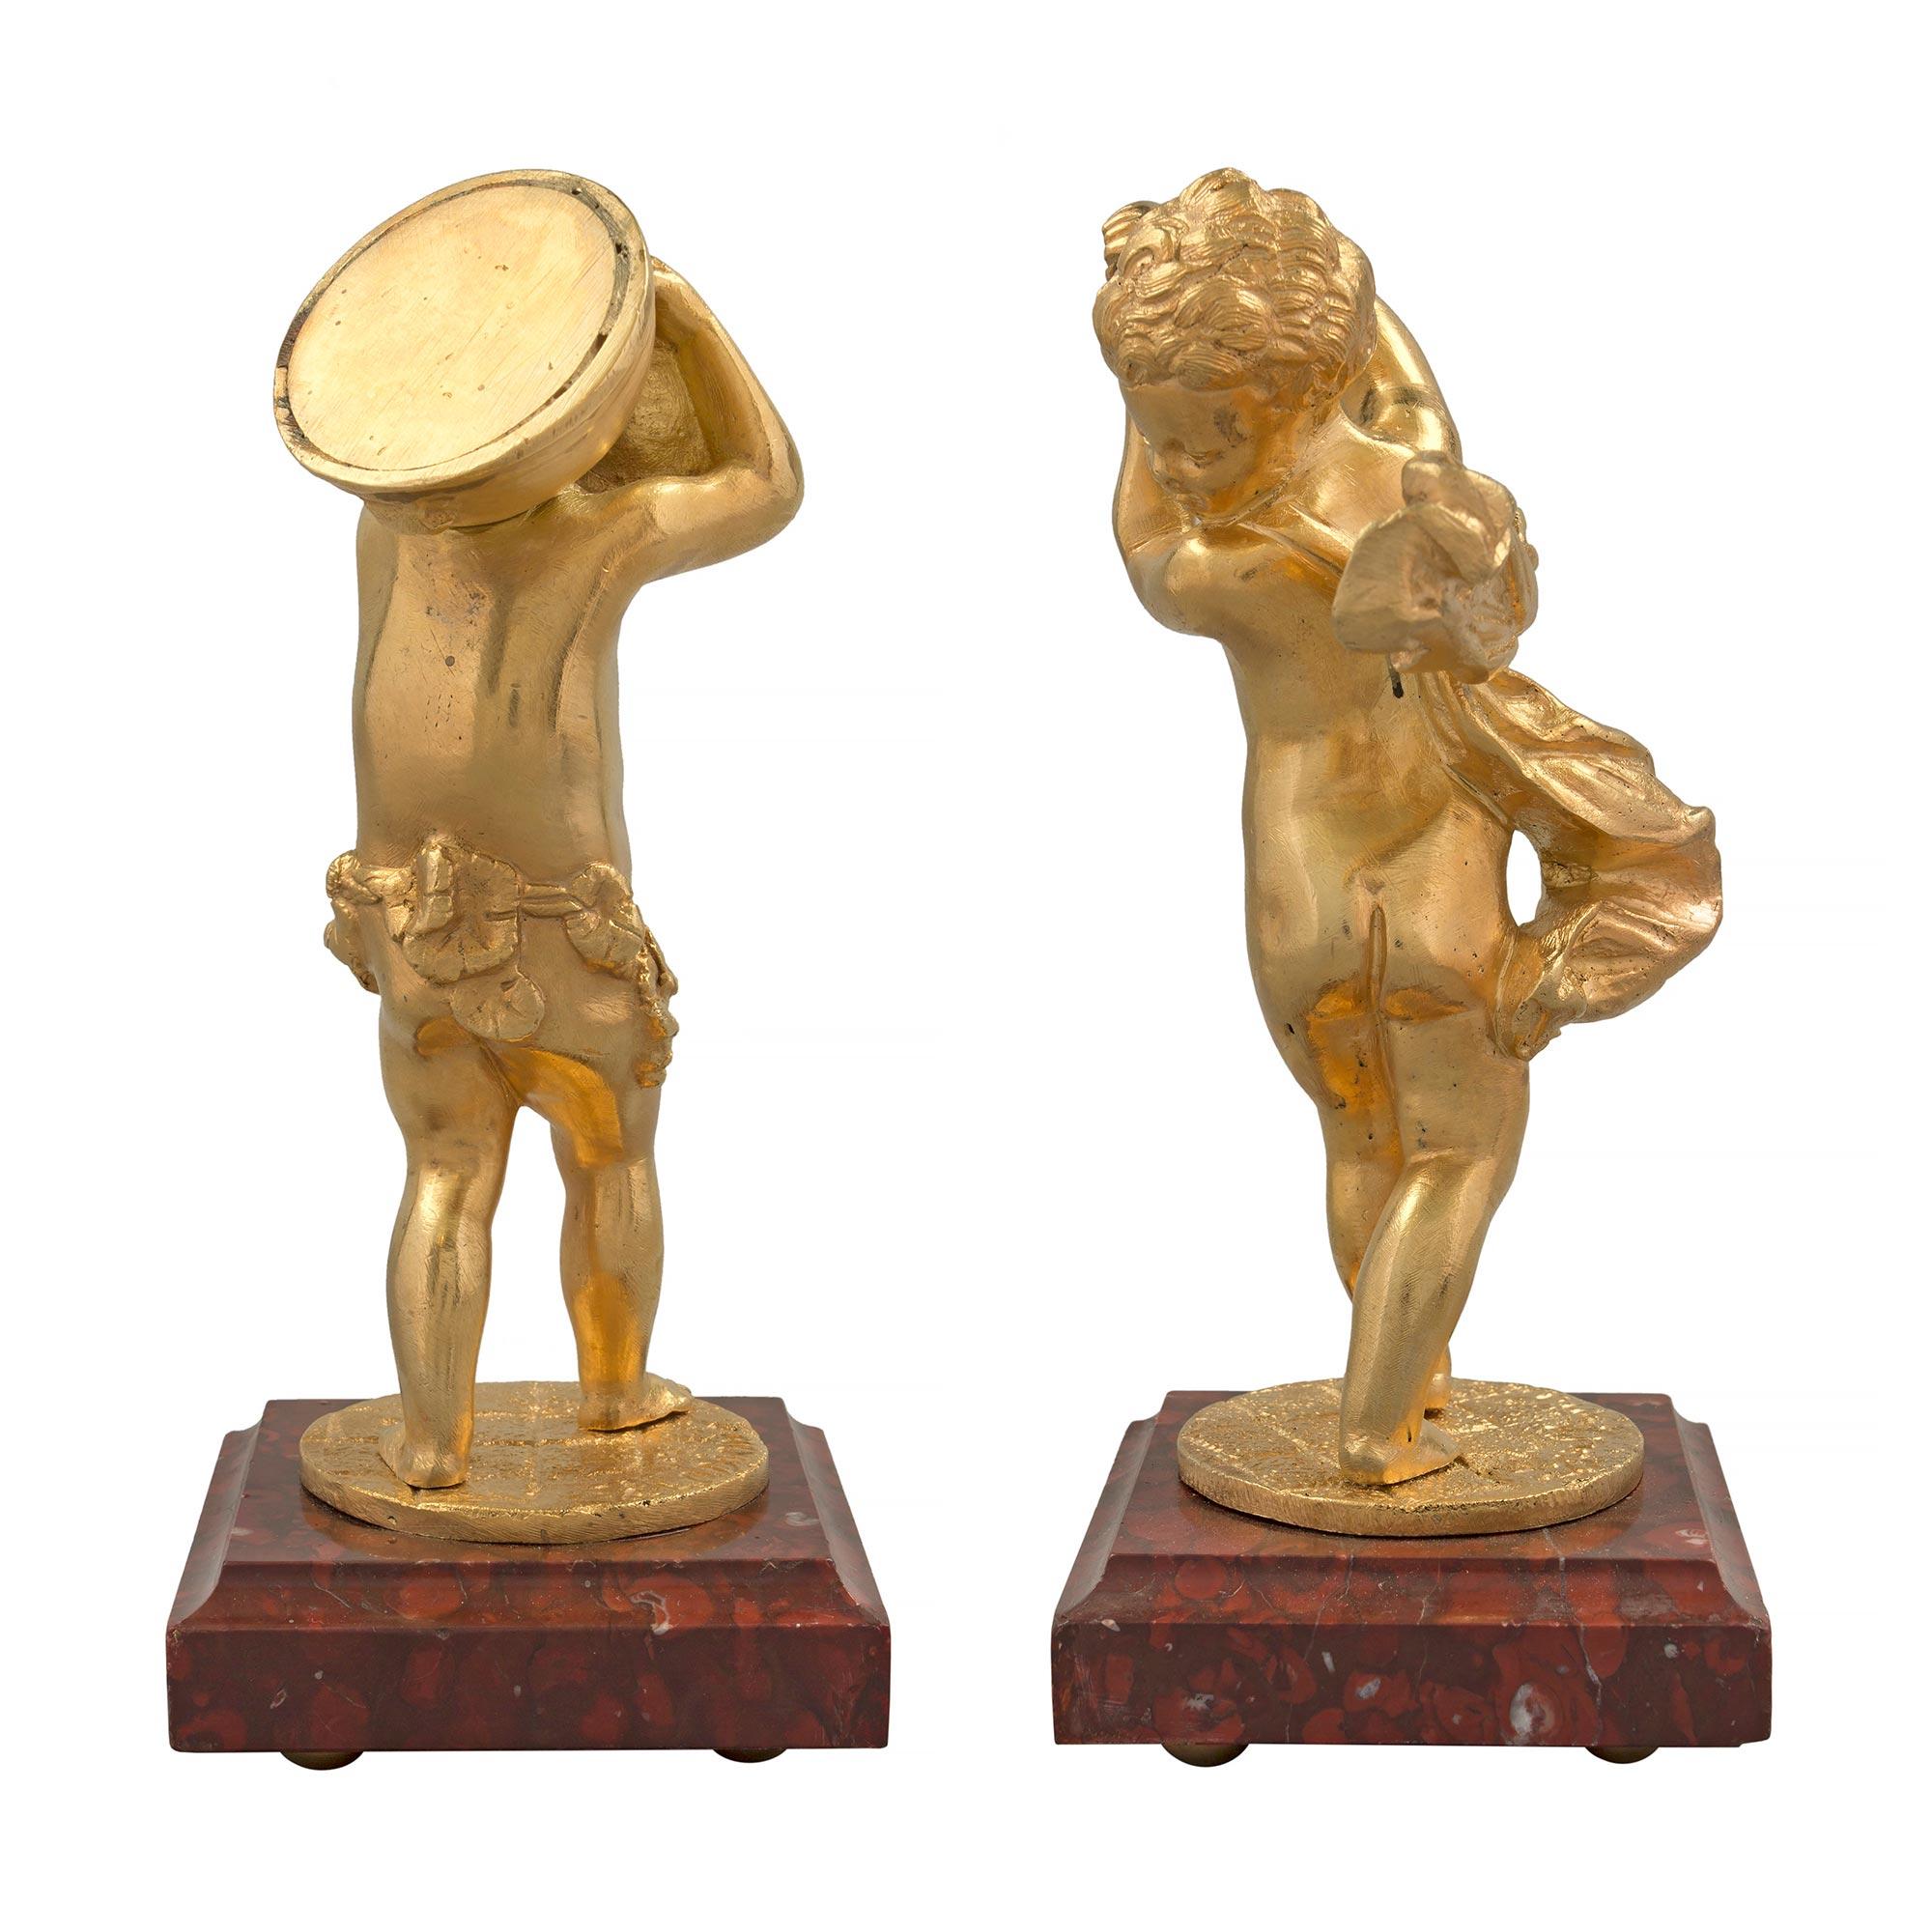 Pair of French 19th Century Louis XVI Style Ormolu Cherub Signed Statues In Good Condition For Sale In West Palm Beach, FL